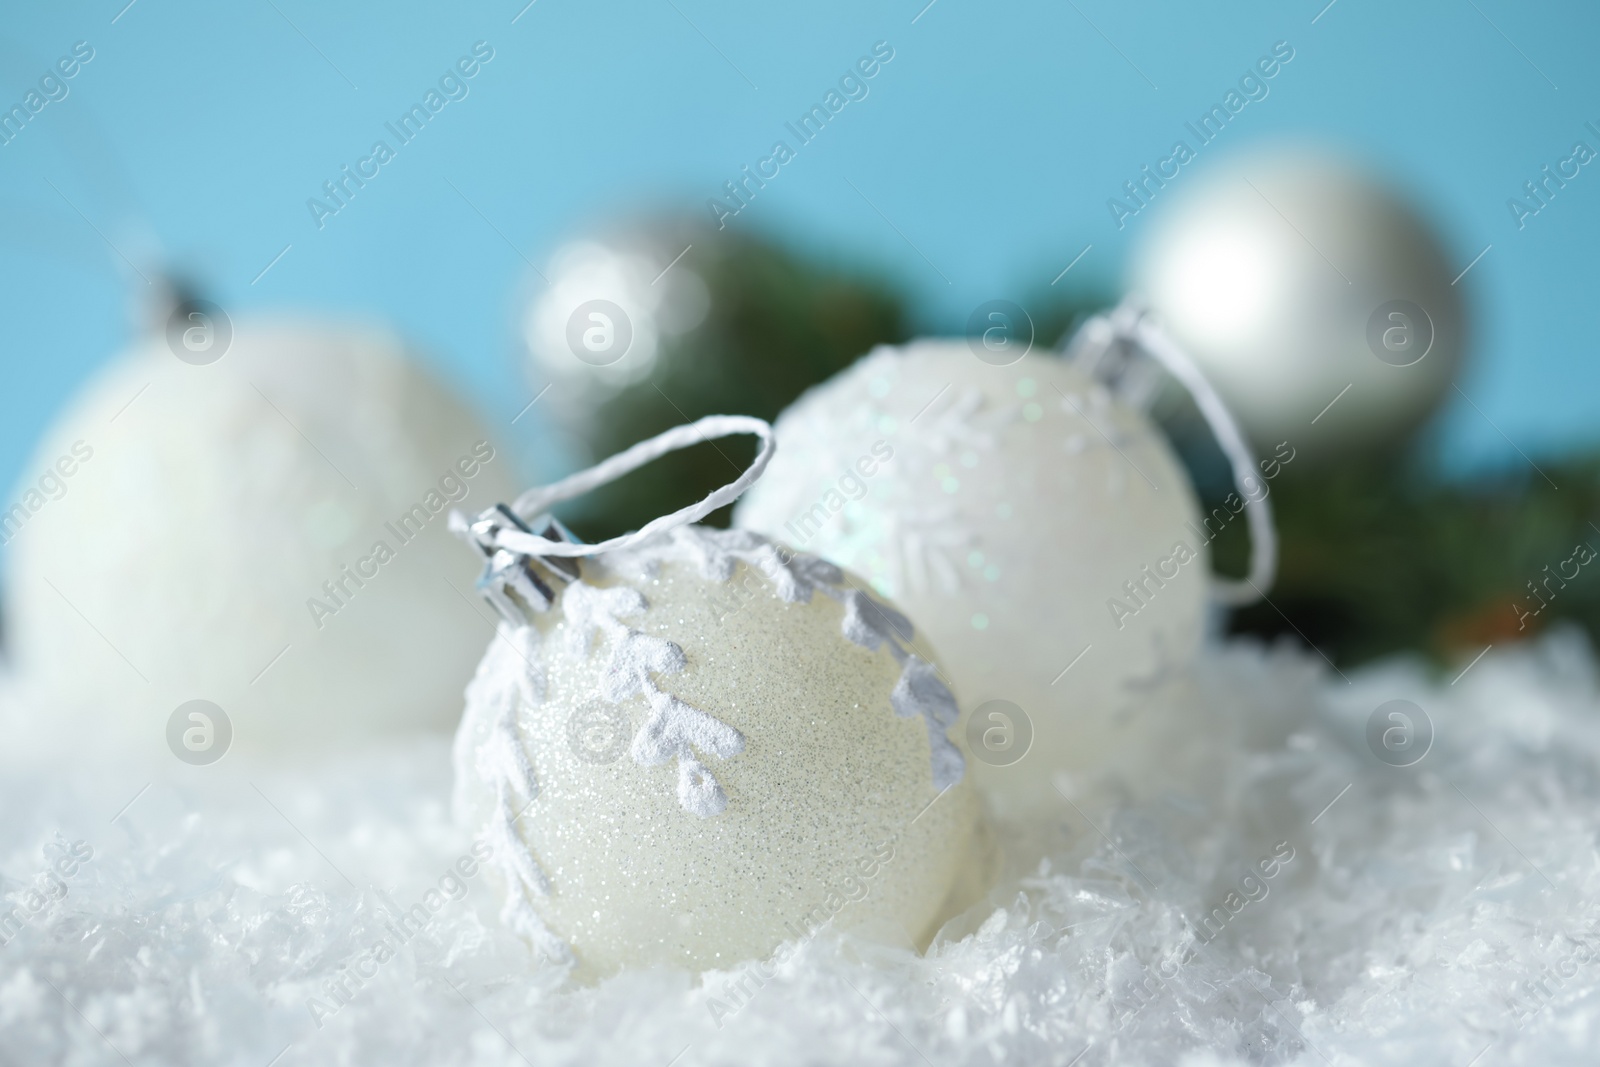 Photo of Beautiful Christmas balls on snow against light blue background